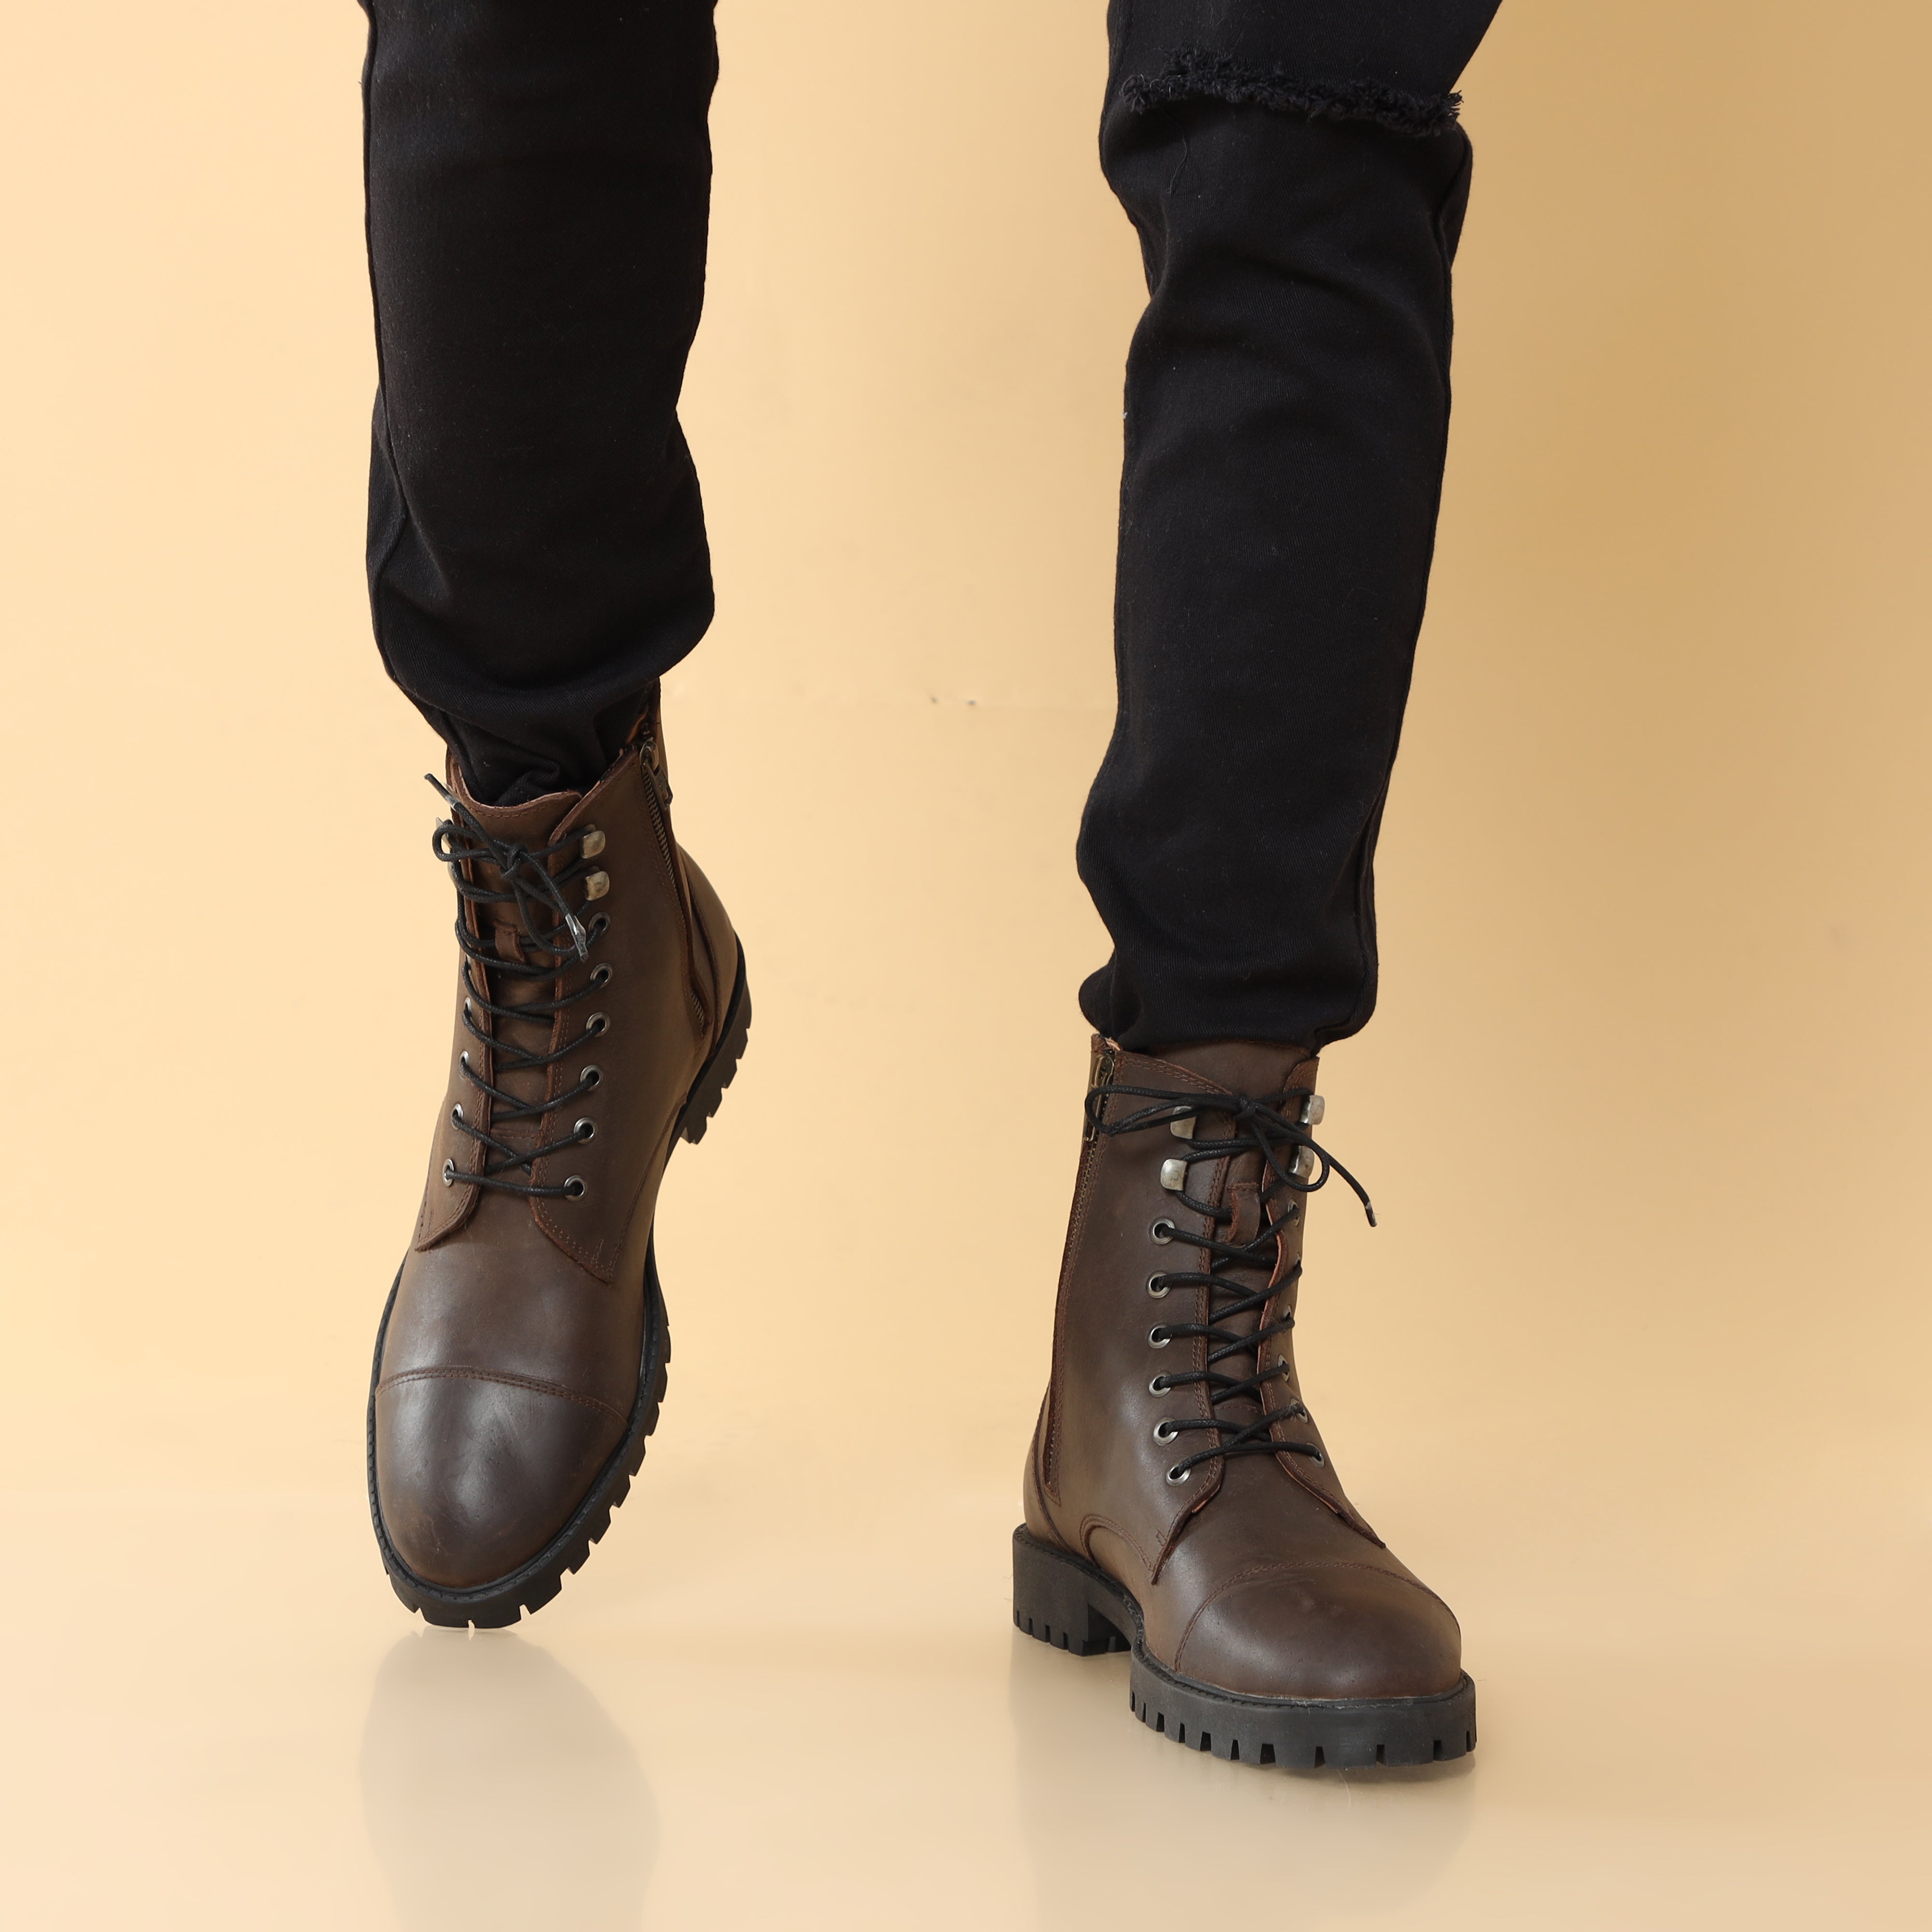 High Ankle Riding Leather Boots For Men